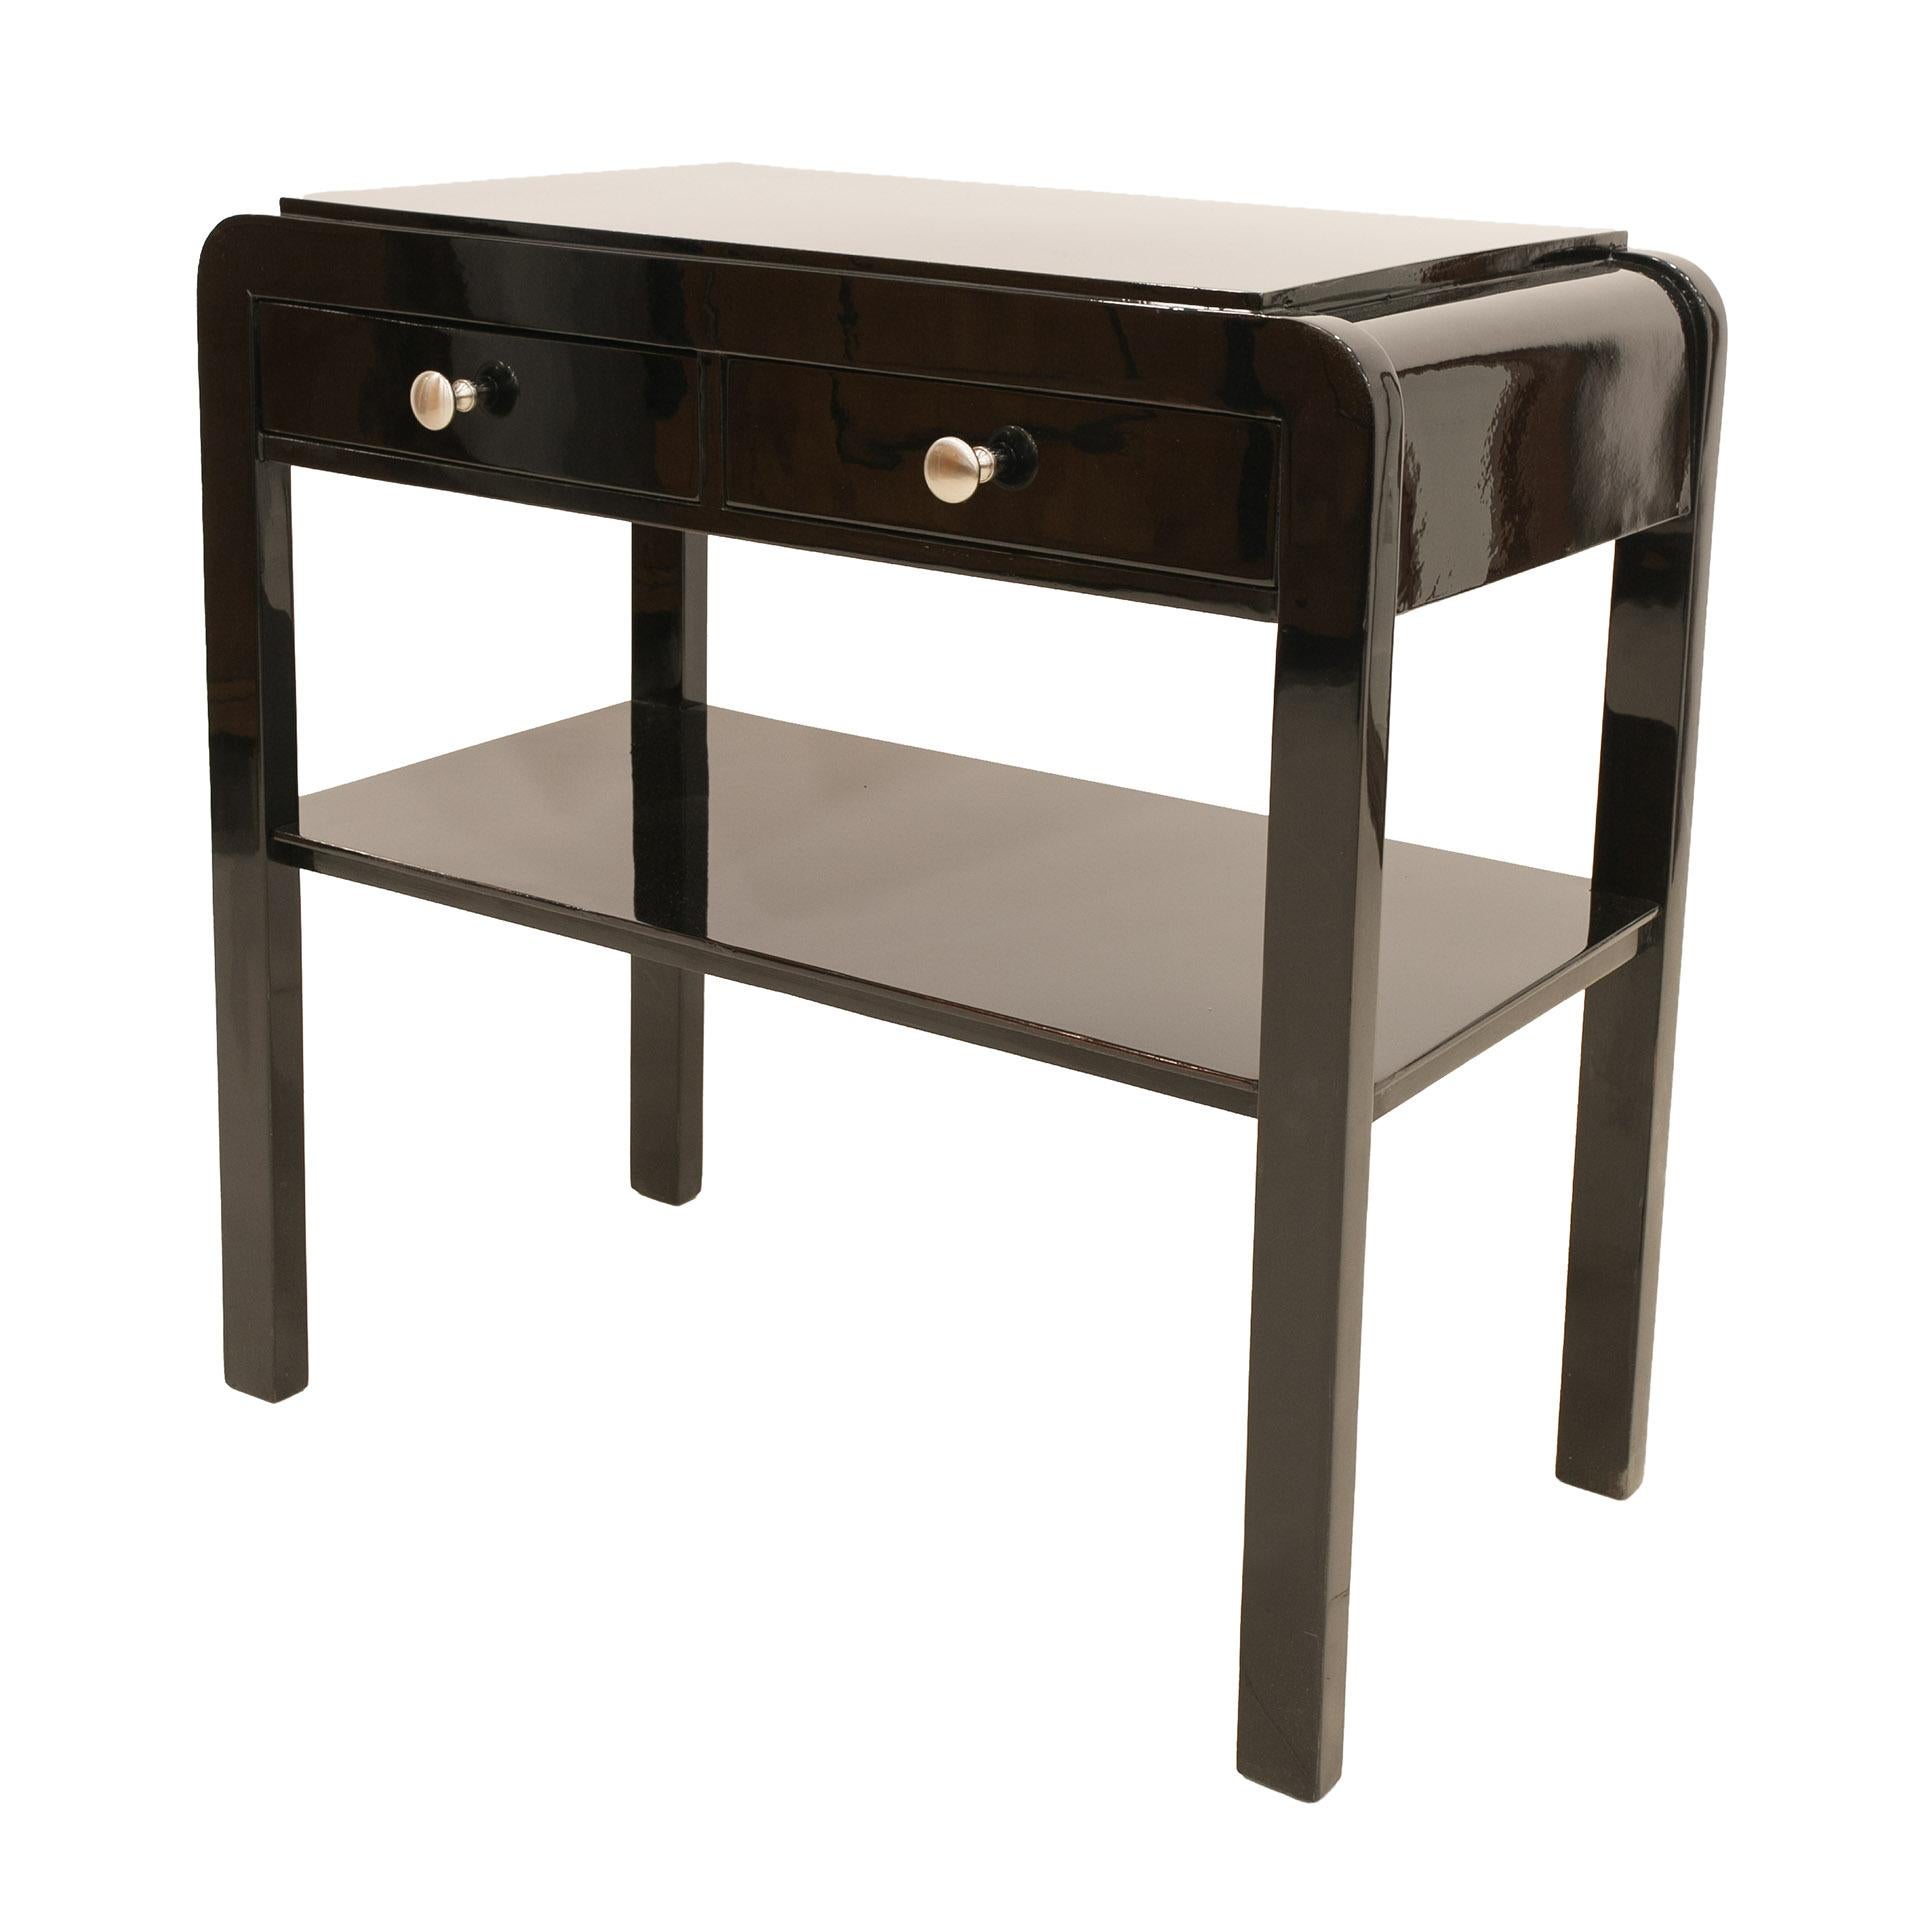 This elegant nightstand comes from Poland from early 20th century. It was renovated, finished with piano lacquer and polished to a high gloss. The table features 2 practical drawers and a shelf.